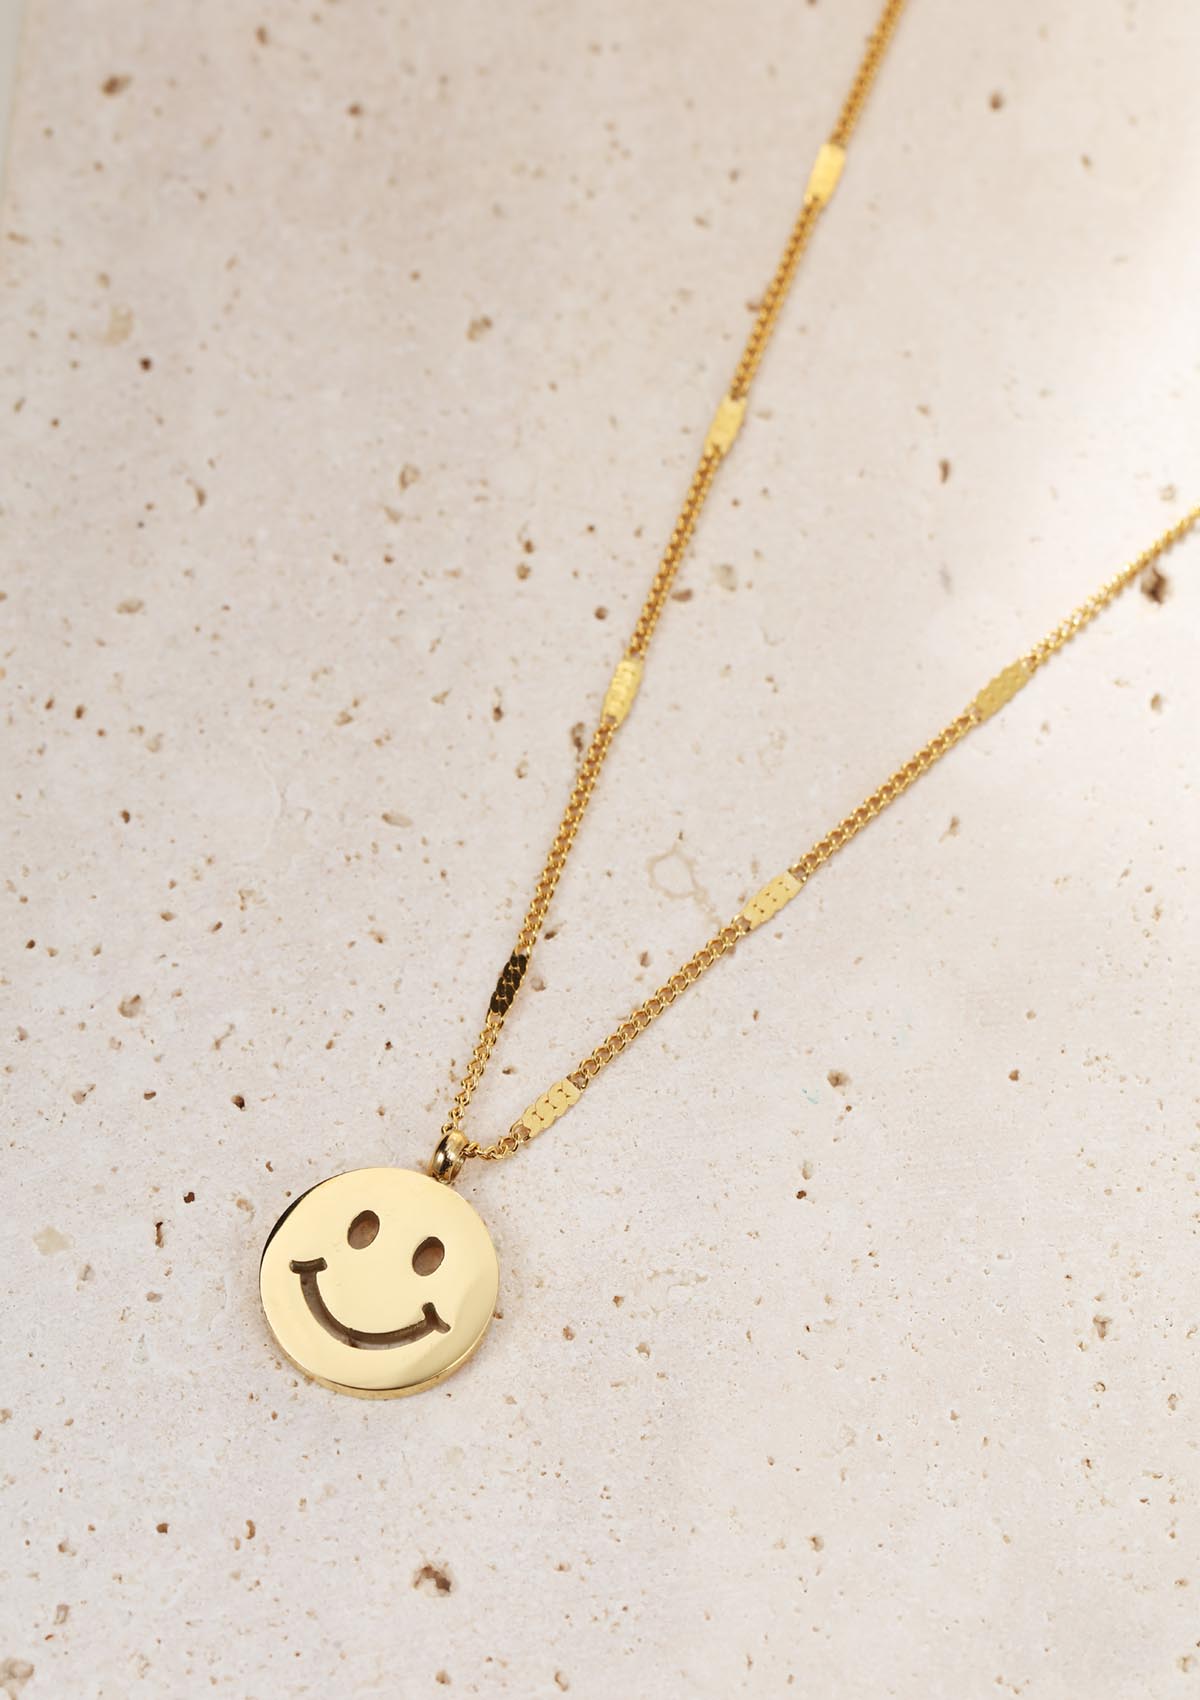 Sterlingsilber Happiness in Kette – Gold Hey Gesicht Anhänger Smiley